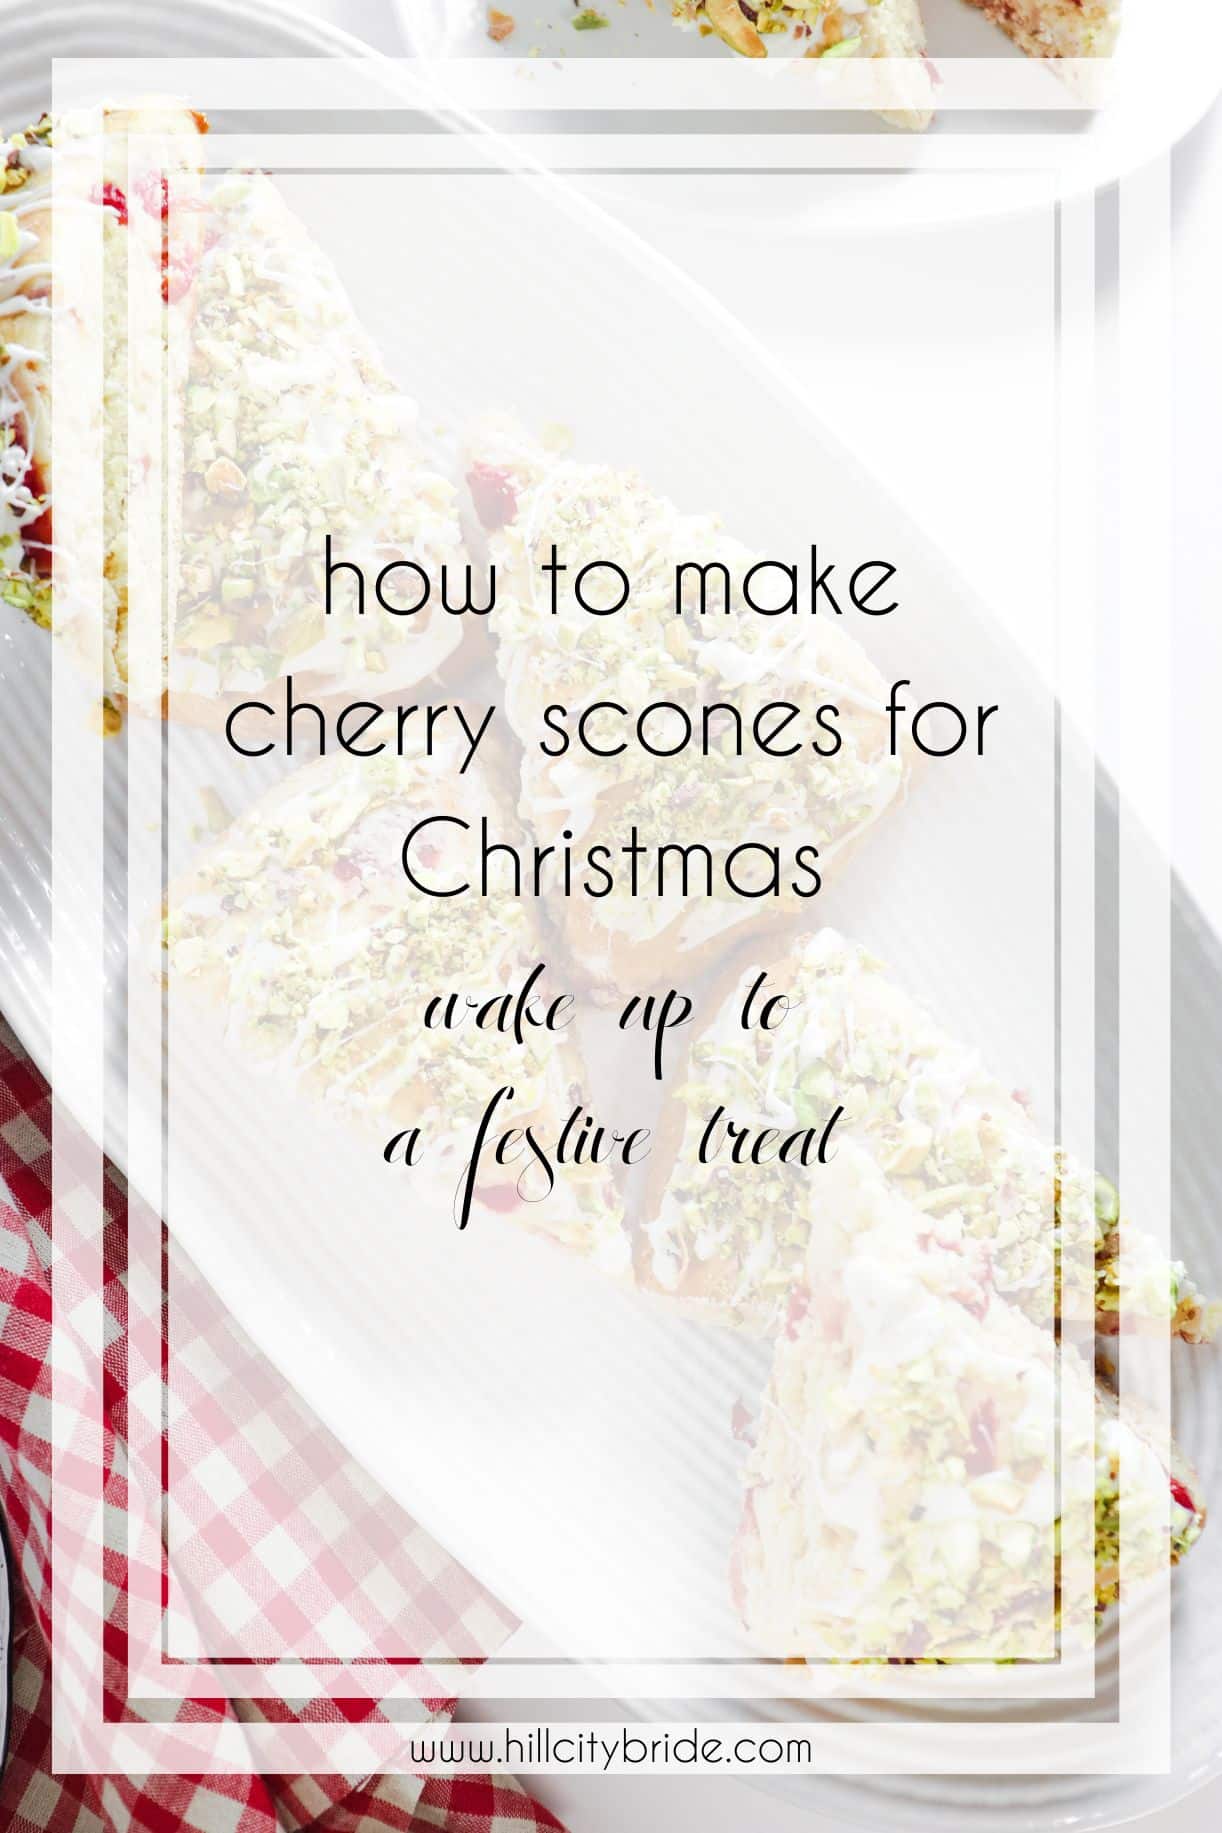 How to Make Cherry Scones for Christmas